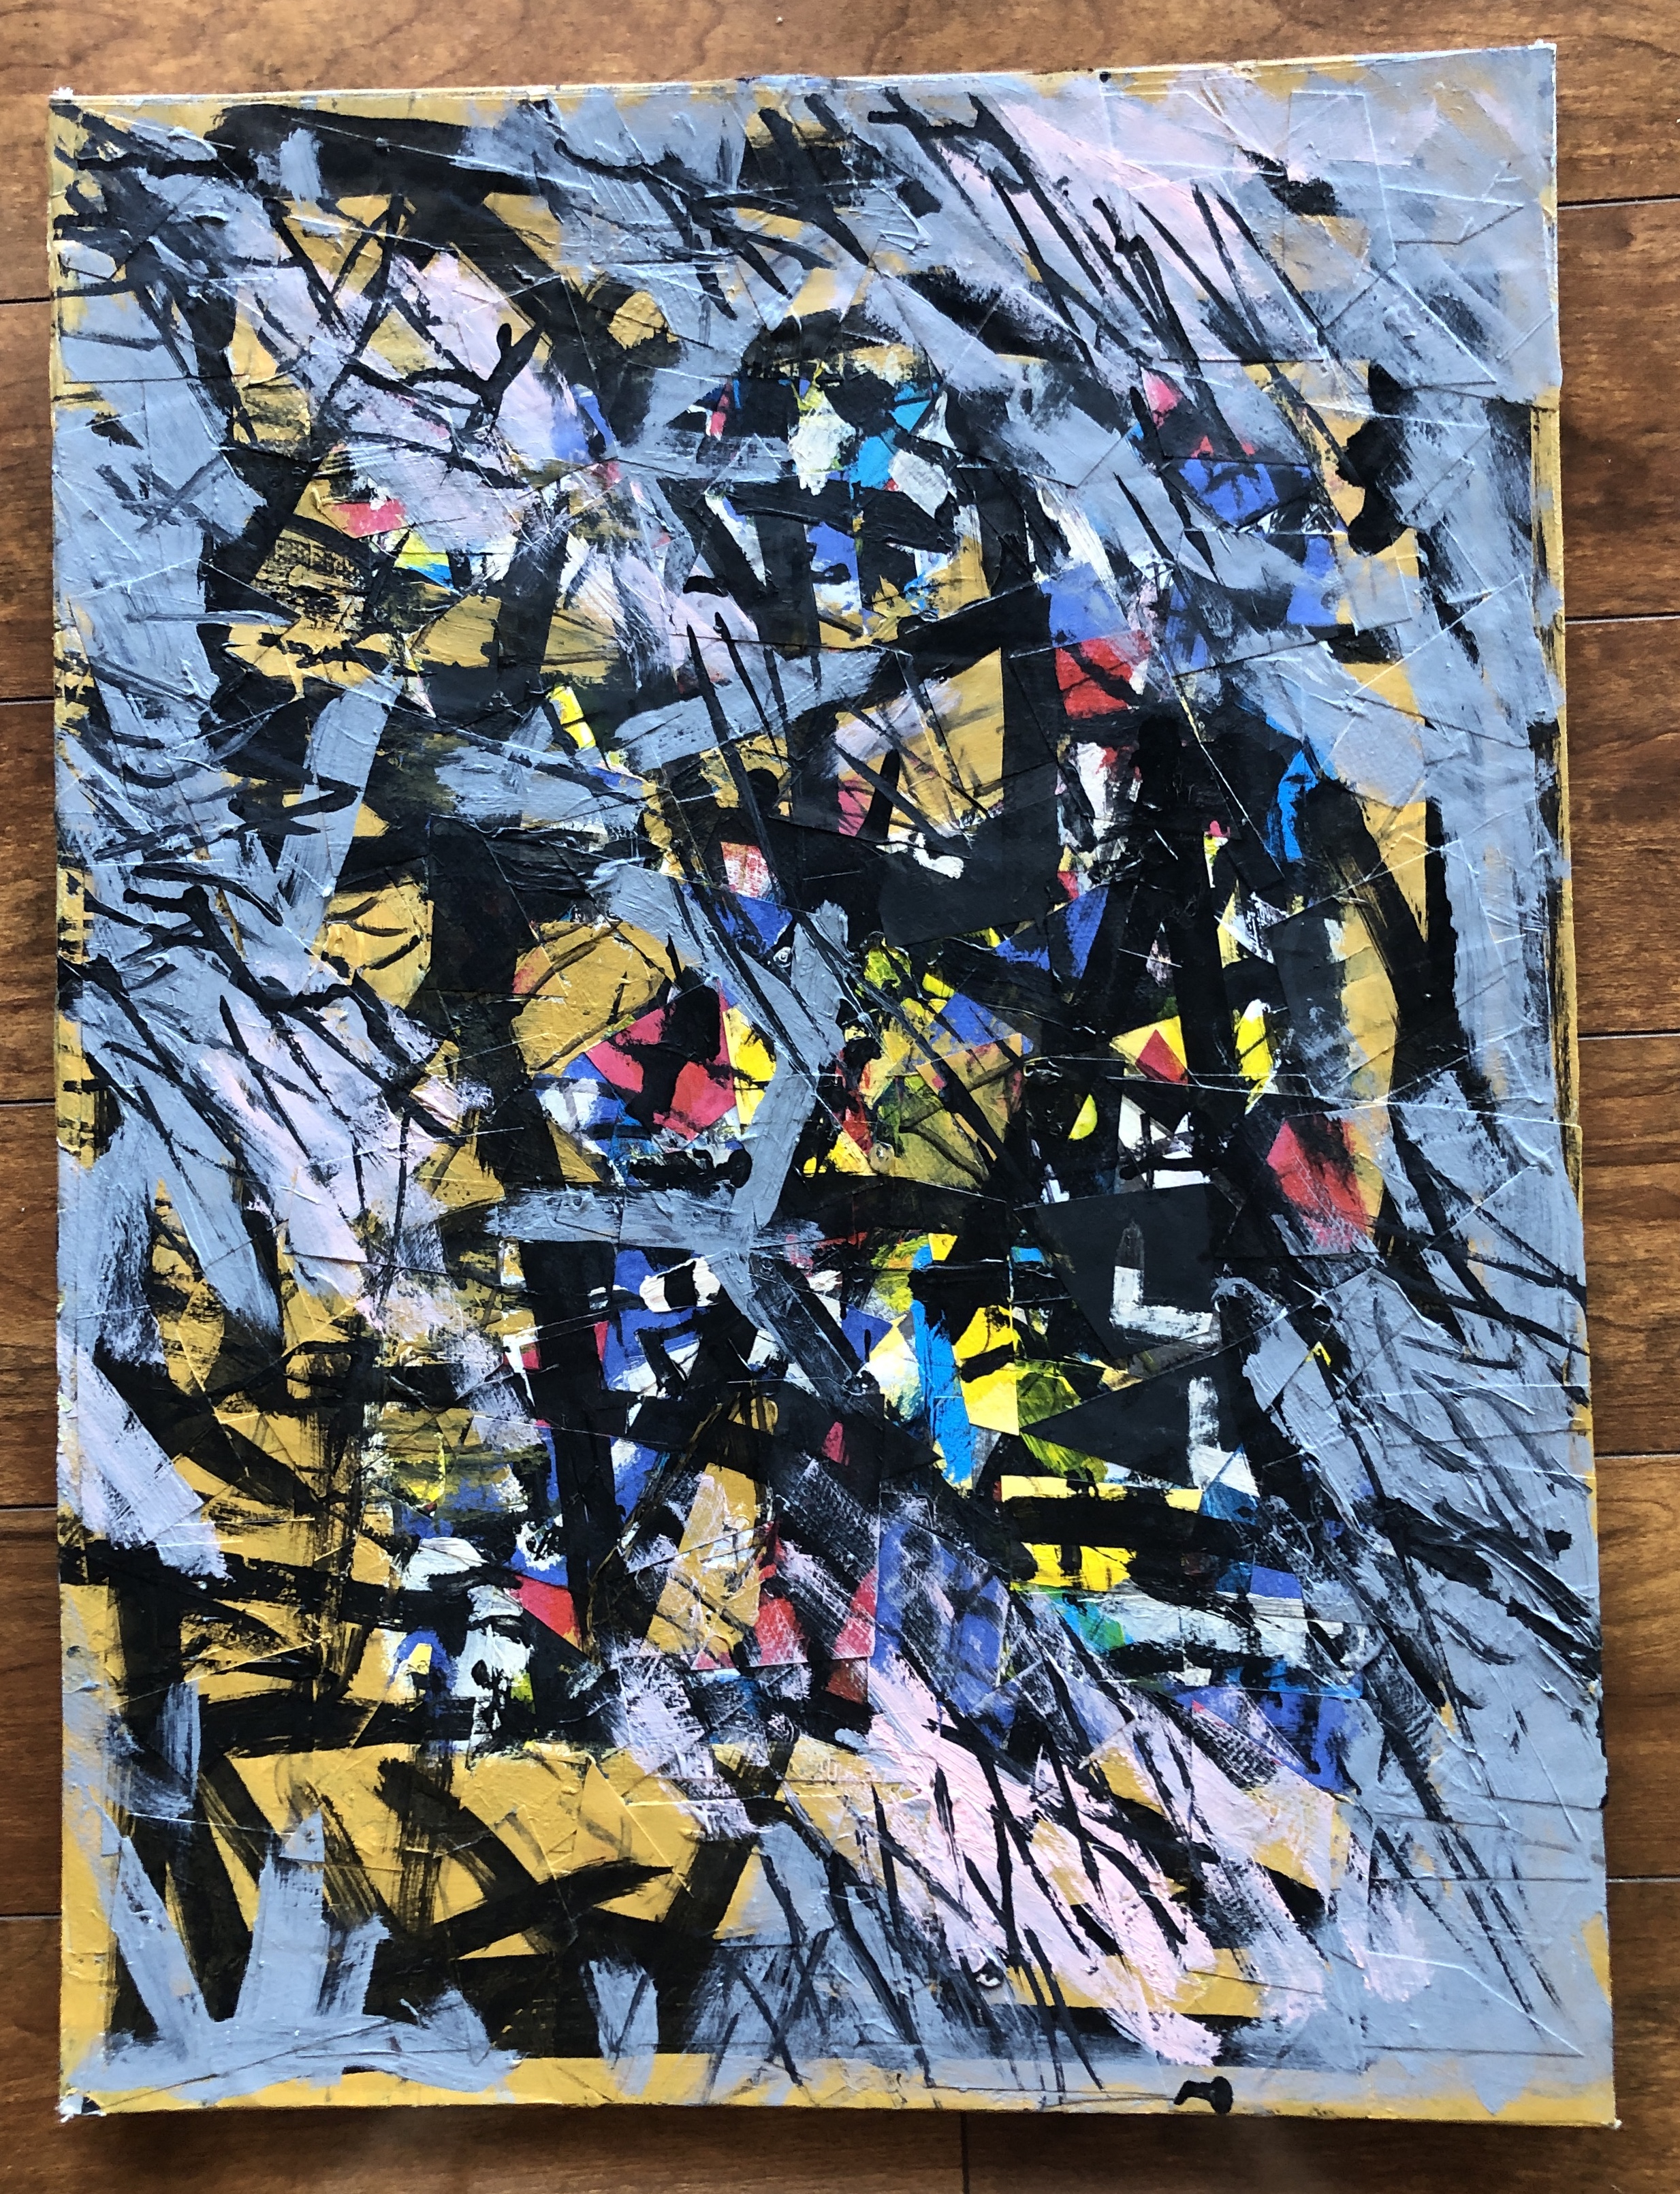 Ronald Ahlström's Untitled (Pollock), Undated, takes a page from Pollock's work. The full coverage, multiple layers, and general feel hearken back to Jackson Pollock's drip paintings, though in this case it's brushstrokes and collage pieces that are more rectilinear than the drips.